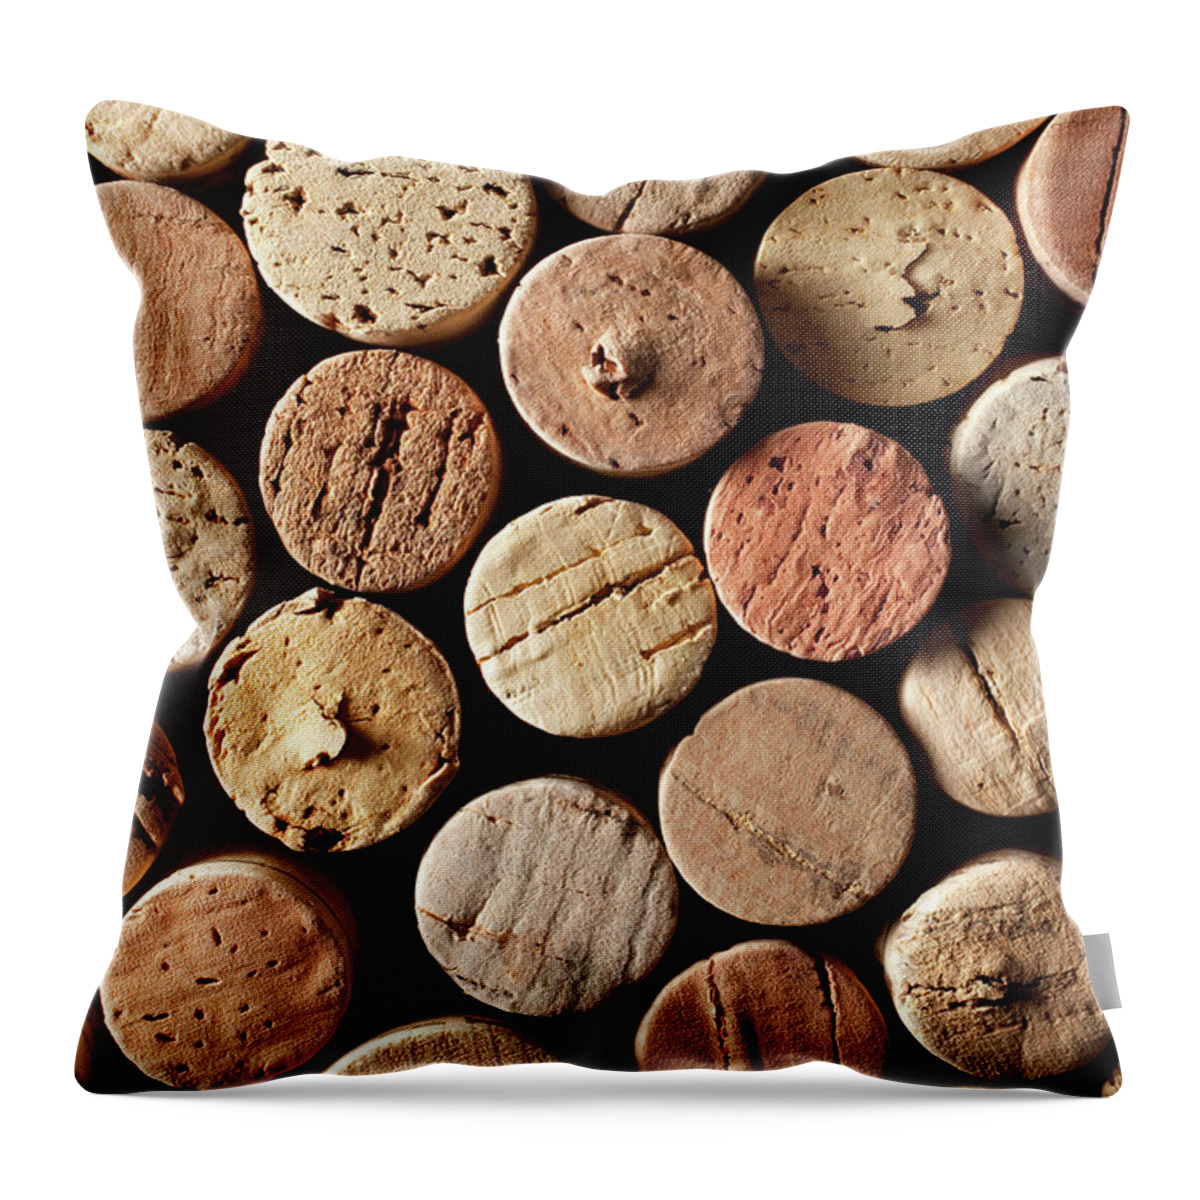 Alcohol Throw Pillow featuring the photograph Wine Corks #1 by Malerapaso